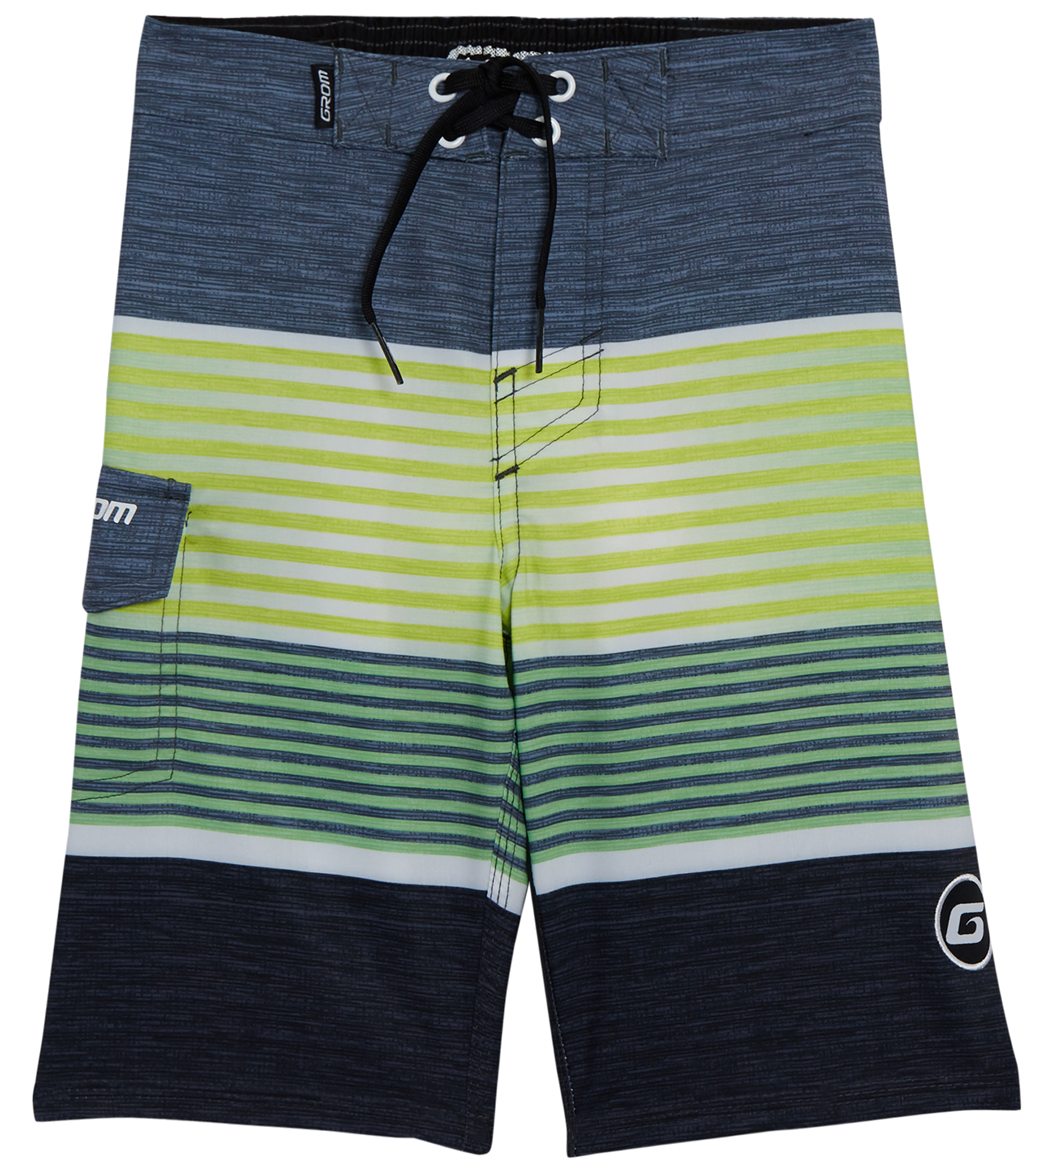 Grom Boys' South Swell Board Short - Green Small - Swimoutlet.com